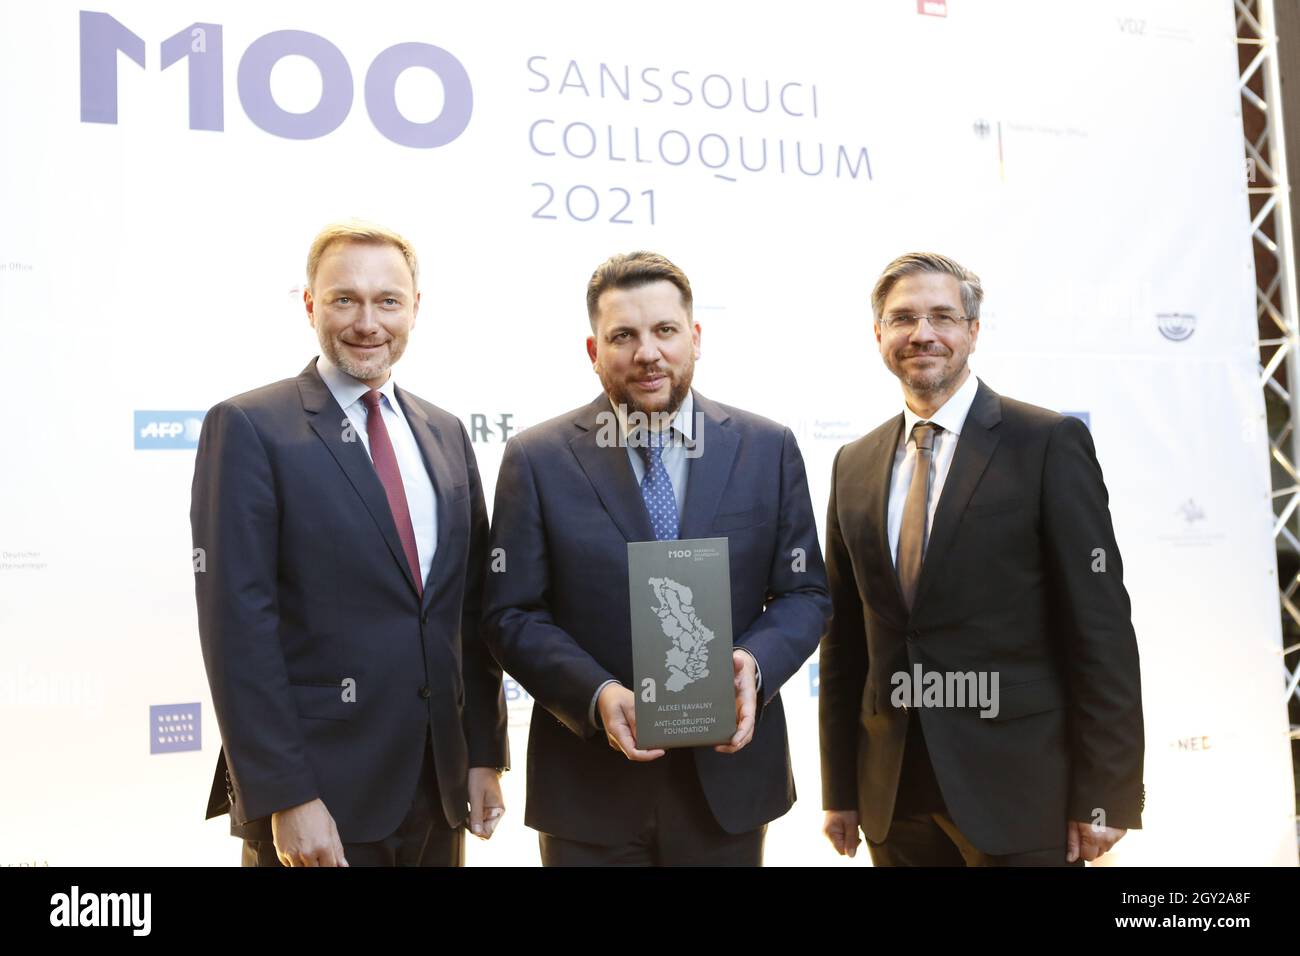 10/06/2021, Potsdam, Germany. Christian Lindner, laudator and federal chairman of the FDP,Leonid Volkov and  Potsdam's Lord Mayor Mike Schubert. M100 Media Award: Imprisoned Kremlin critic Navalny receives media award in Potsdam. The award for Navalny, who has been imprisoned since January, is accepted by his closest colleague and confidante Leonid Volkov. Stock Photo